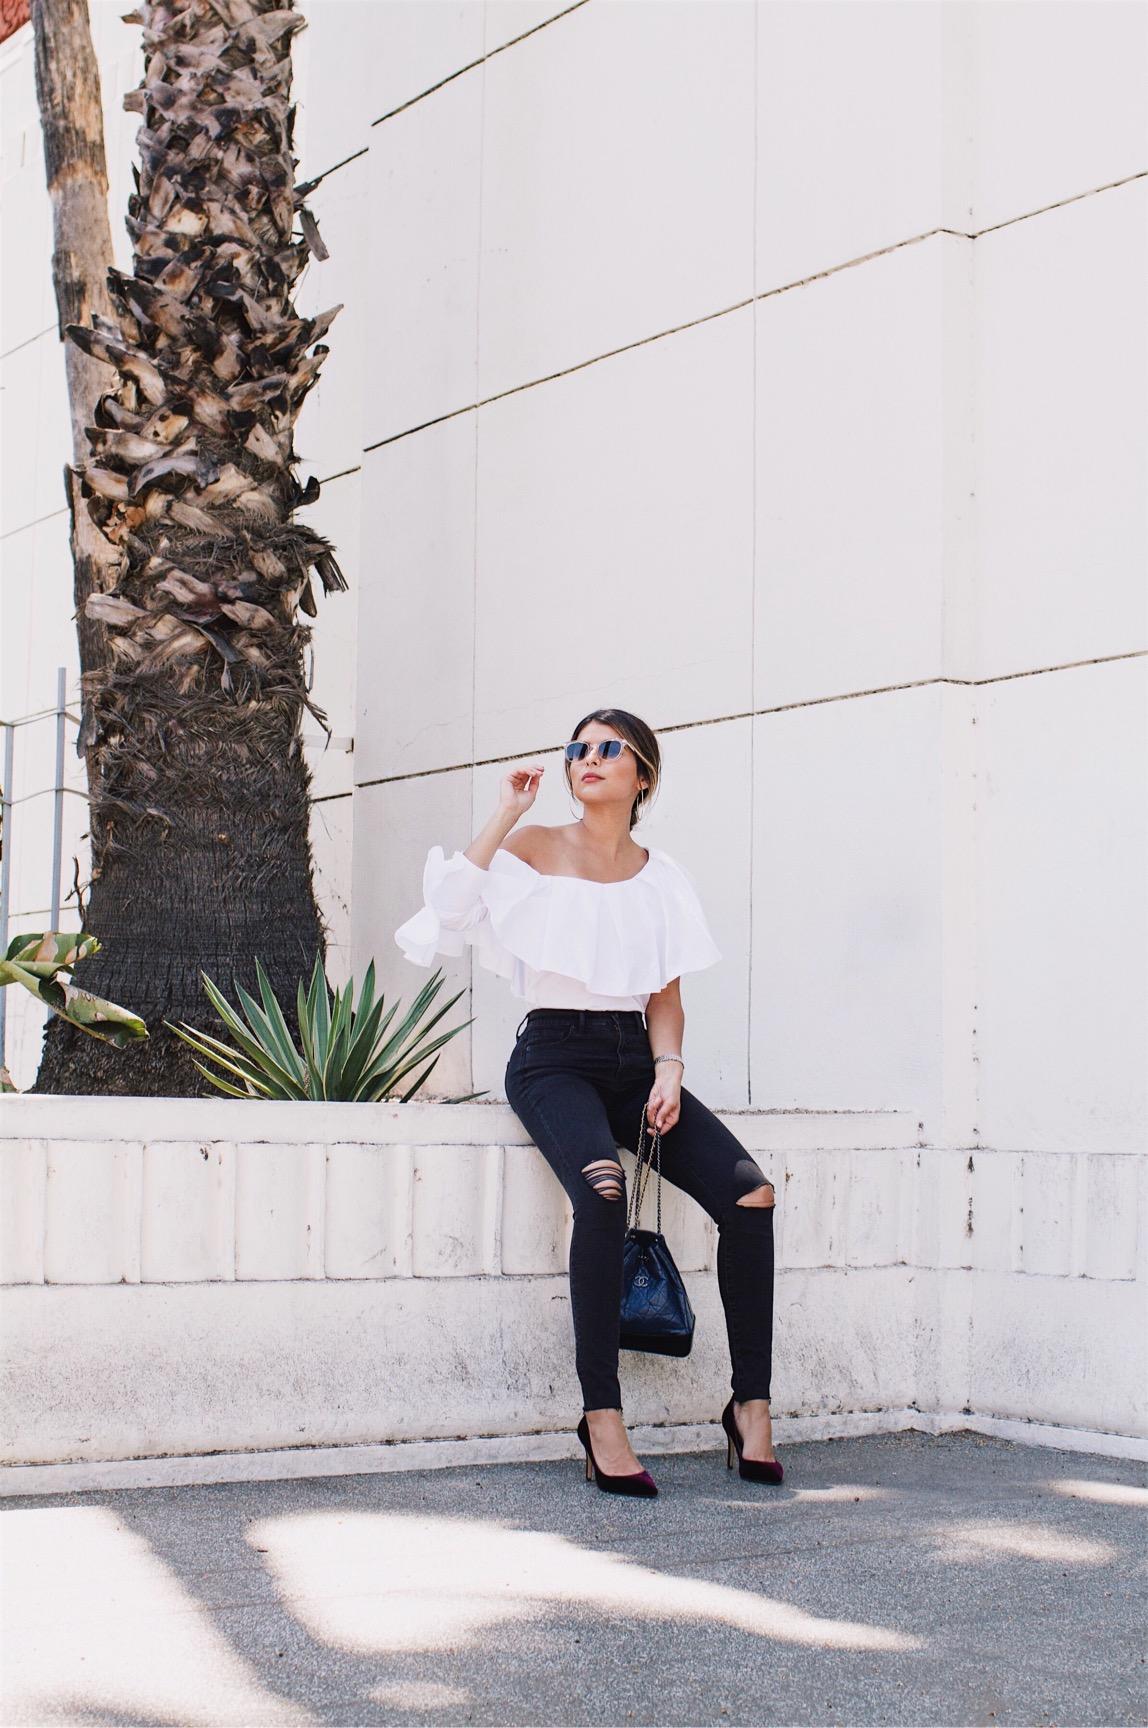 Pam Hetlinger wearing a White Ruffle Top styled with black ripped jeans and velvet pumps.